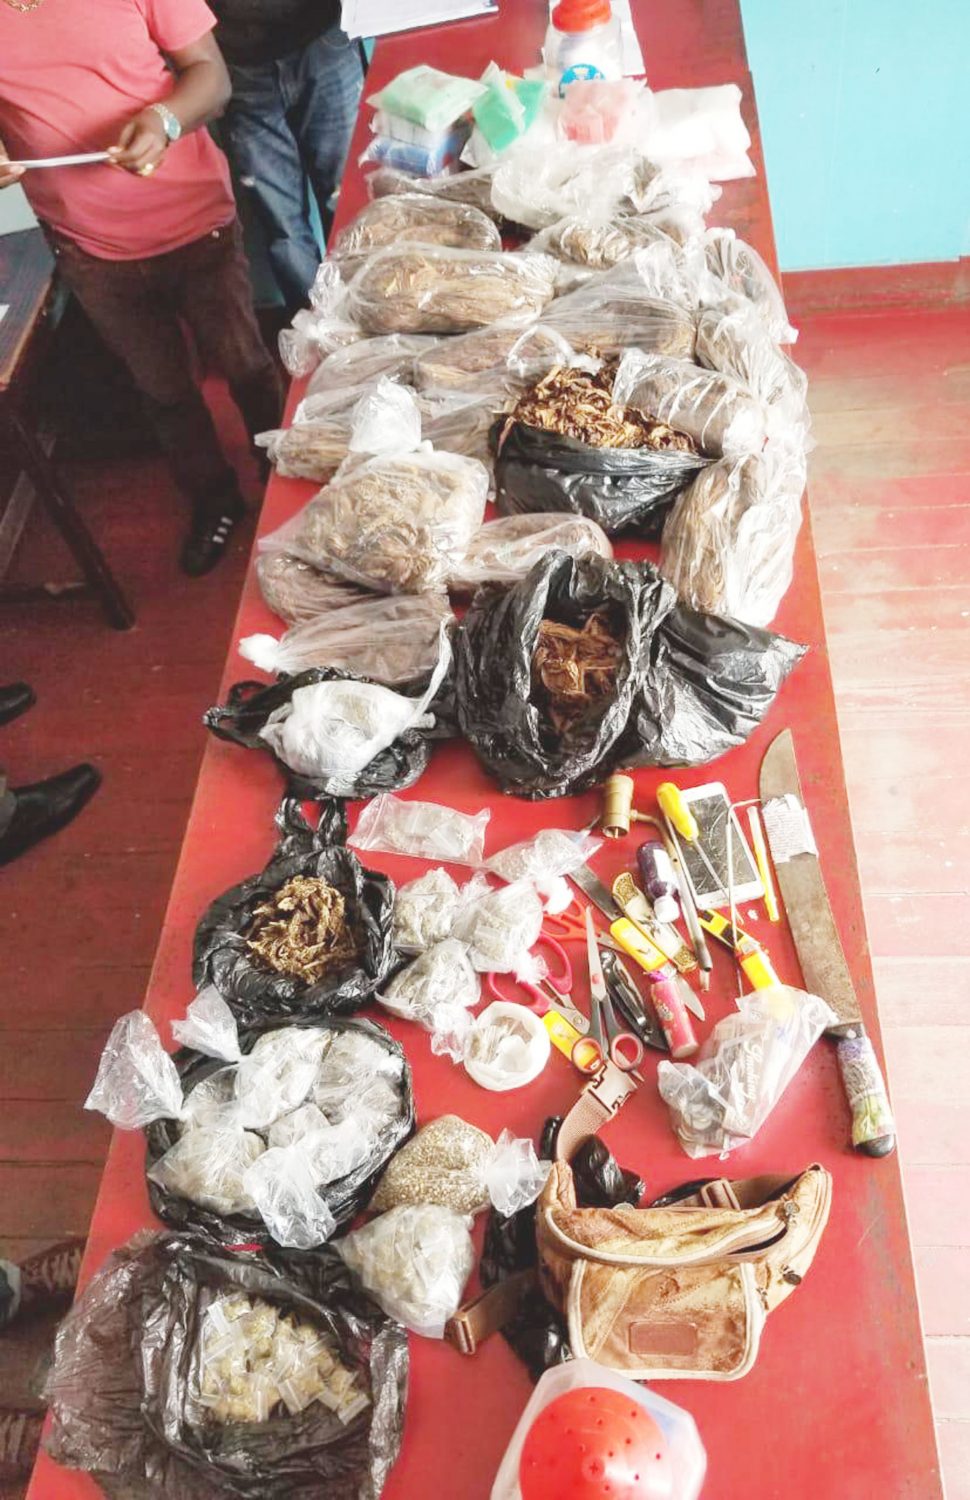 A quantity of narcotics and paraphernalia seized yesterday after a three-hour cordon and search operation by the Guyana Police Force (GPF) at the Stabroek Market and its environs 